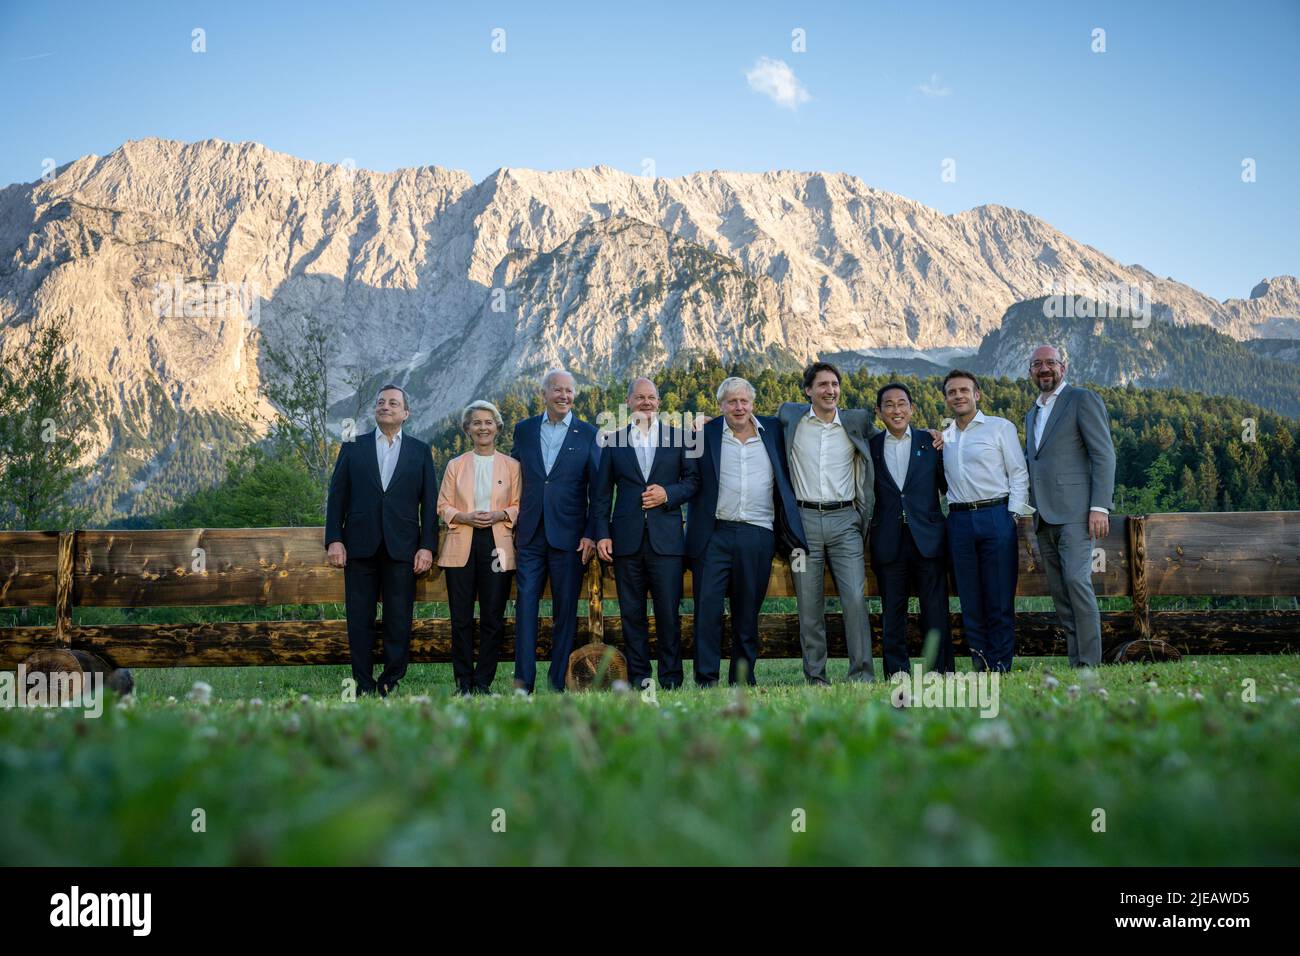 26 June 2022, Bavaria, Elmau: The leaders lined up for an informal group photo at the 'Merkel - Obama' bench after dinner at the G7 meeting at Schloss Elmau. Mario Draghi, Prime Minister of Italy, Ursula von der Leyen, EU Commission President, US President Joe Biden, German Chancellor Olaf Scholz (SPD), Boris Johnson, Prime Minister of Great Britain, Justin Trudeau, Prime Minister of Canada, Fumio Kishida, Prime Minister of Japan, Emmanuel Macron, President of France, Charles Michel, EU Council President. Germany is hosting the G7 summit of economically strong democracies. On the first day of Stock Photo